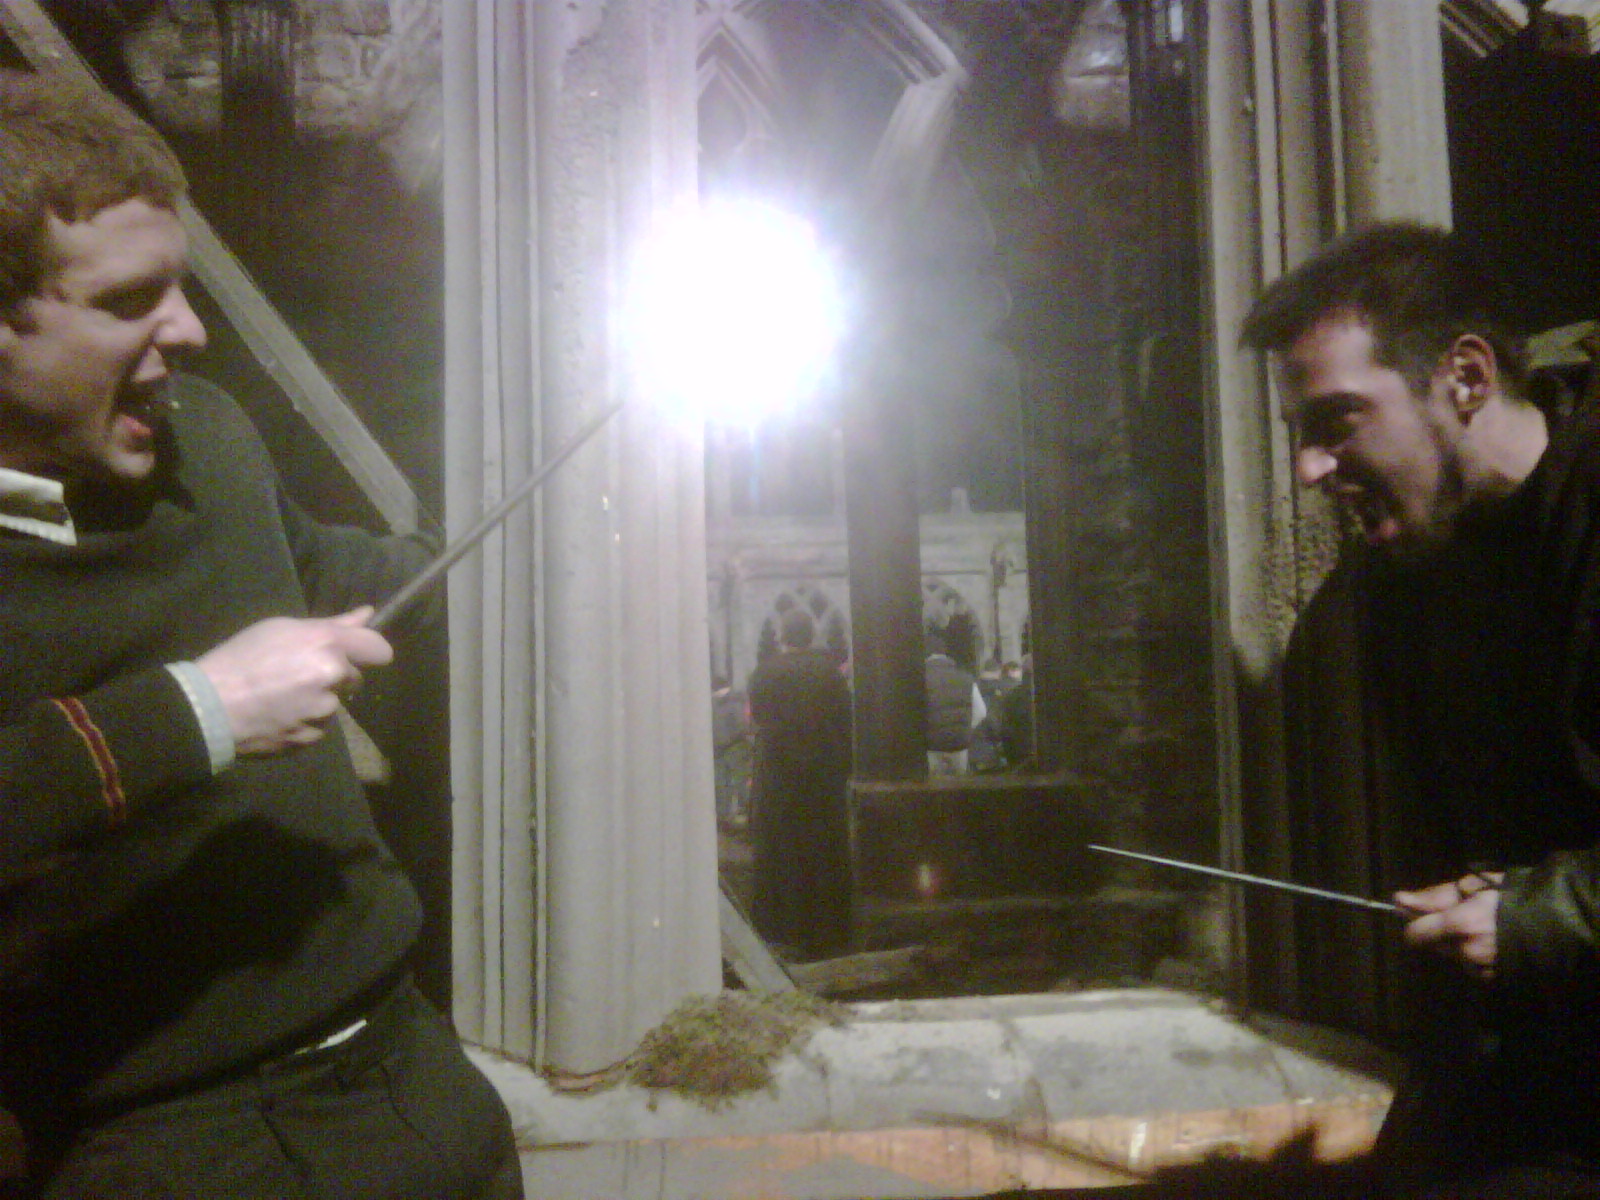 Freddie Hogan shooting magic out of his wand against a death eater